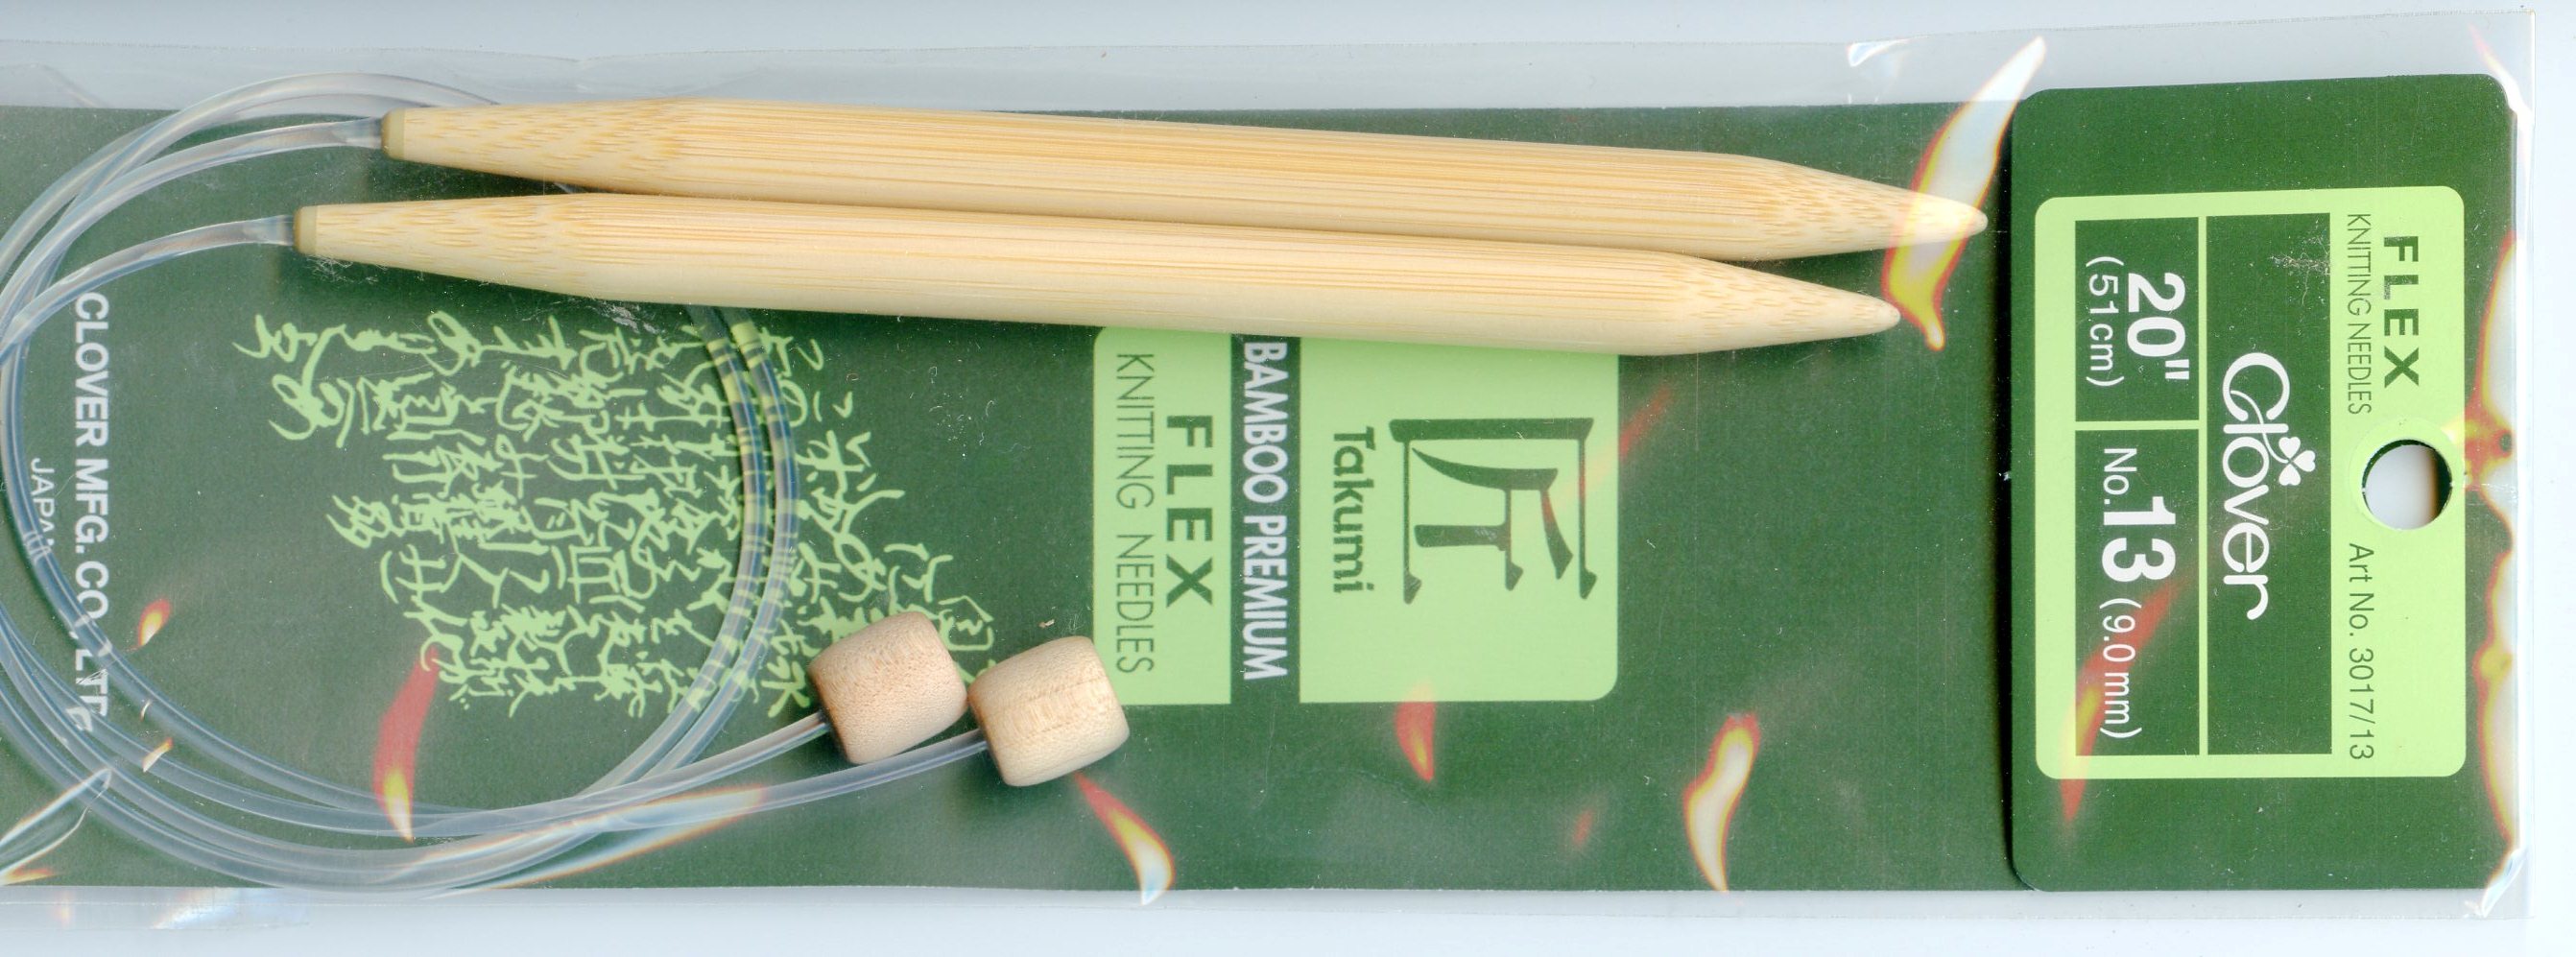 Product Review and Giveaway: Clover Bamboo Flex Knitting Needles